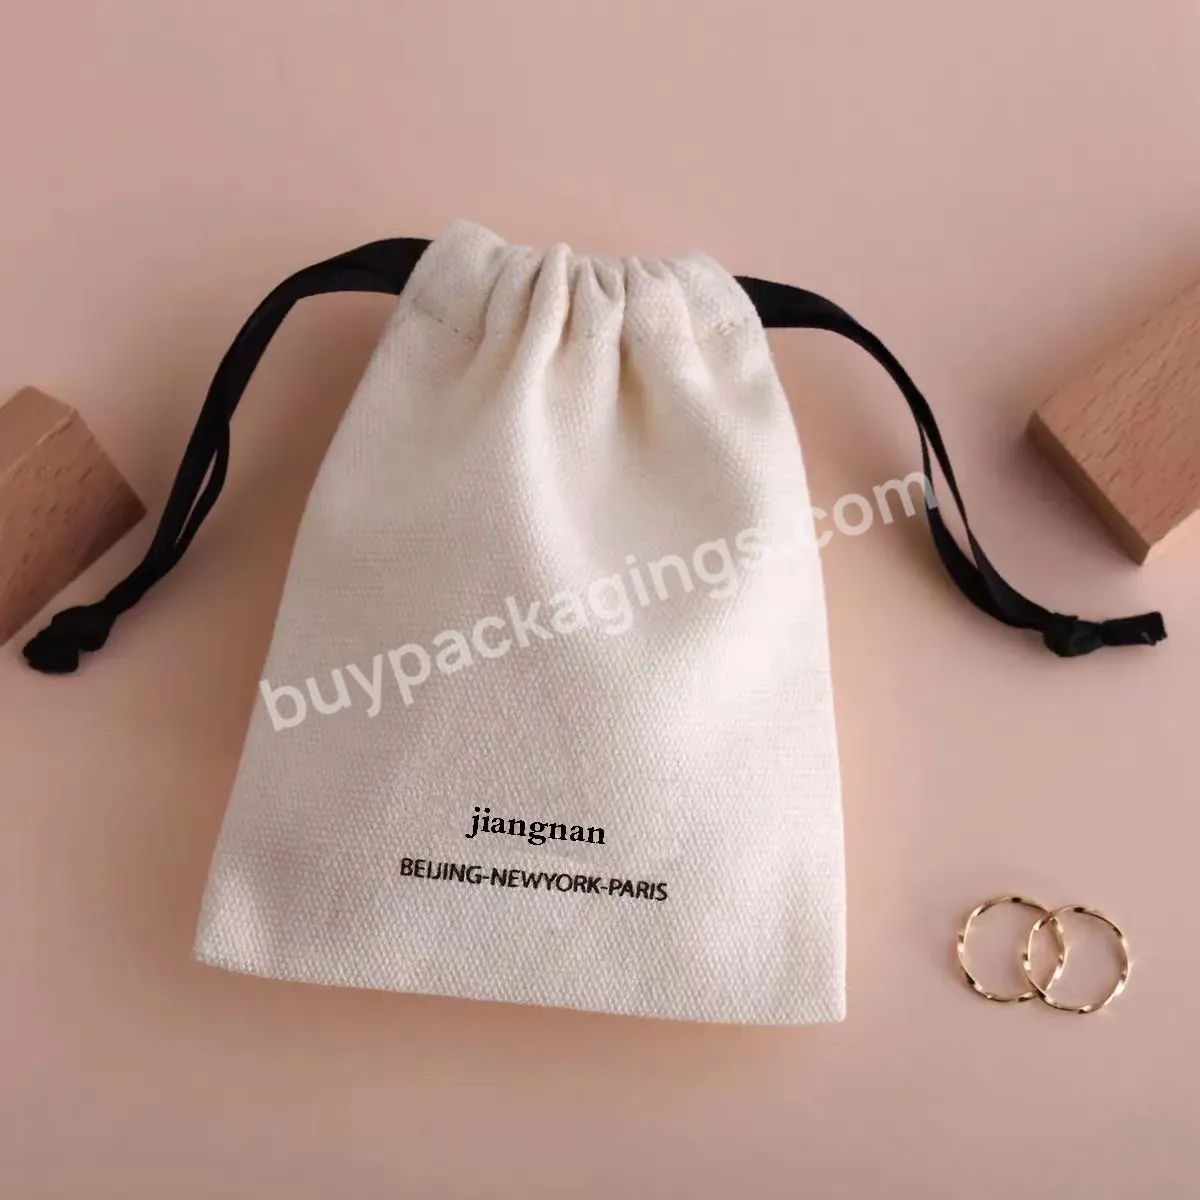 Promotional Recyclable Cotton Packing For Underwear Linen Cotton Drawstring Bag Organic Drawstring Cotton Bags Dust Bag - Buy Recyclable Cotton Packing For Underwear,Drawstring Cotton Bags,Dust Bag.